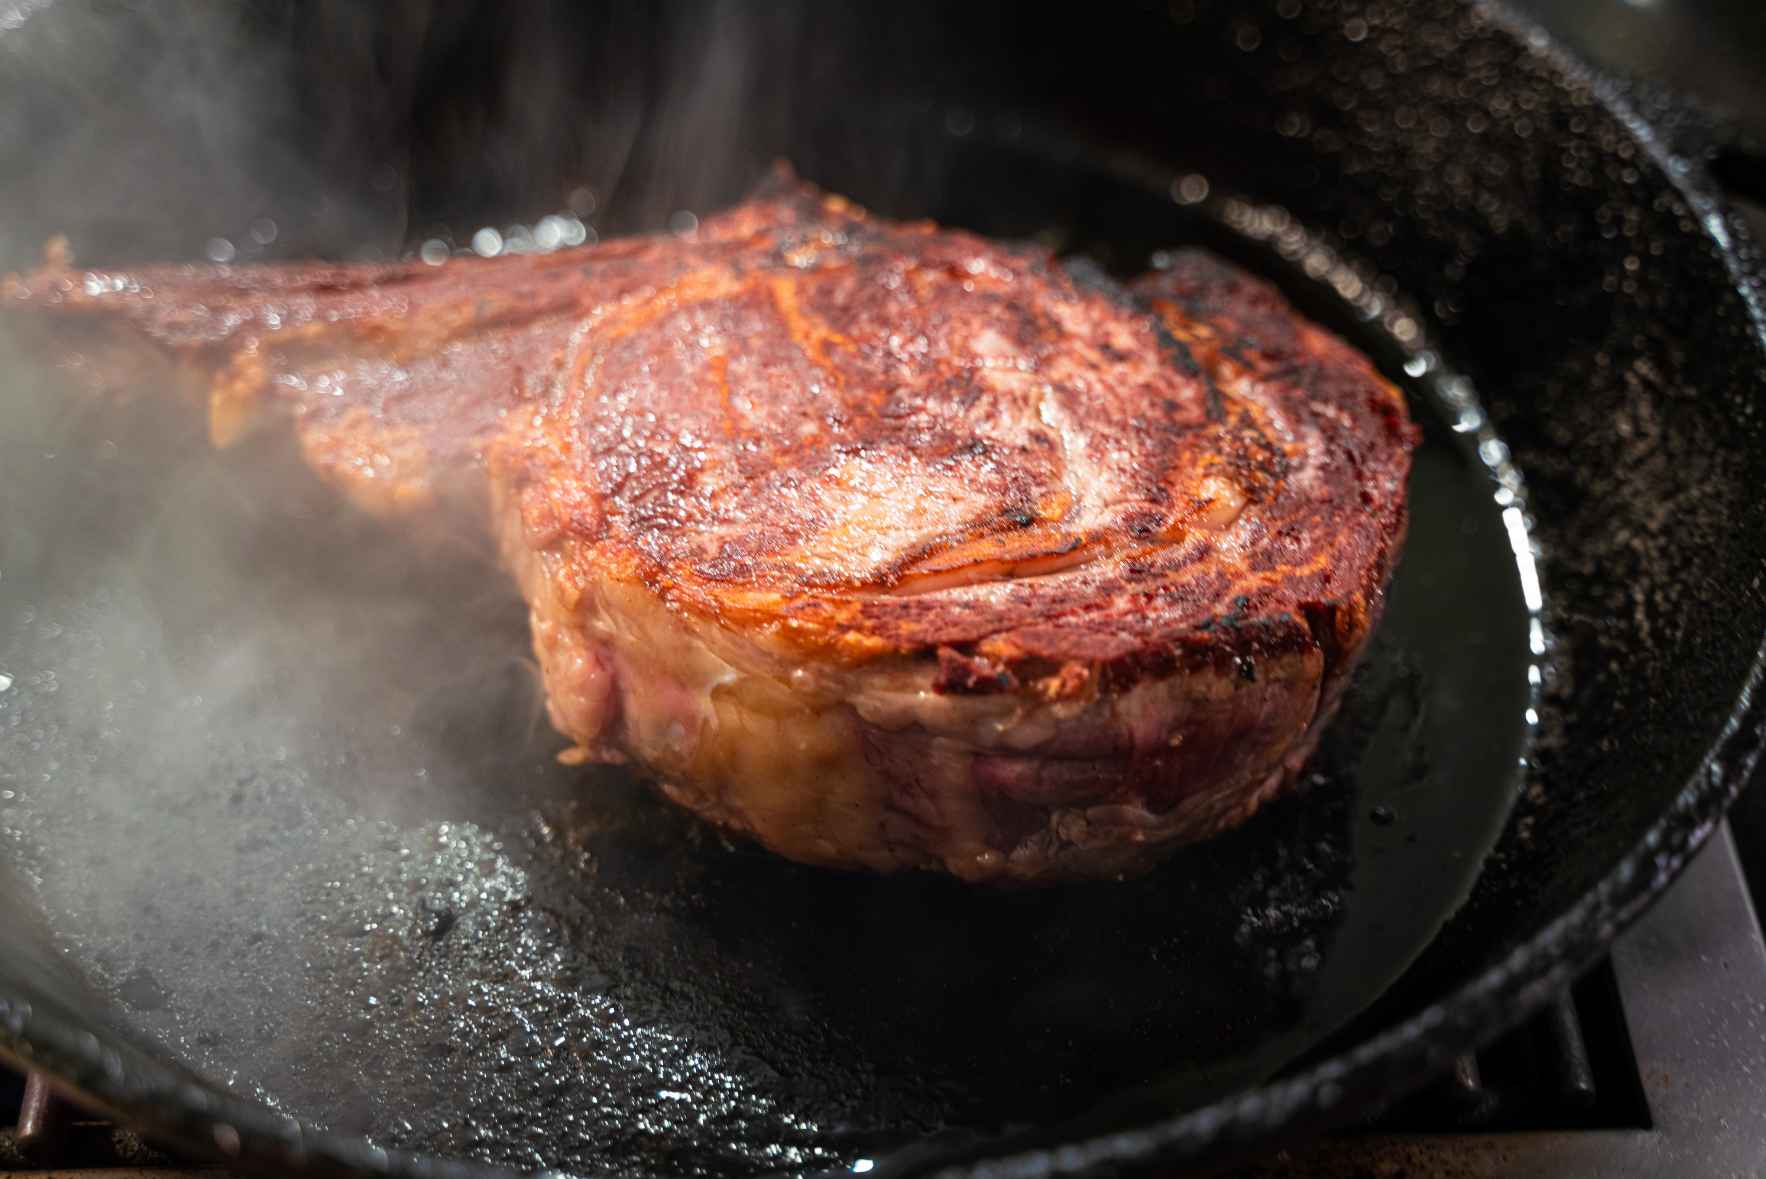 How To Cook Steak in Cast Iron Pan